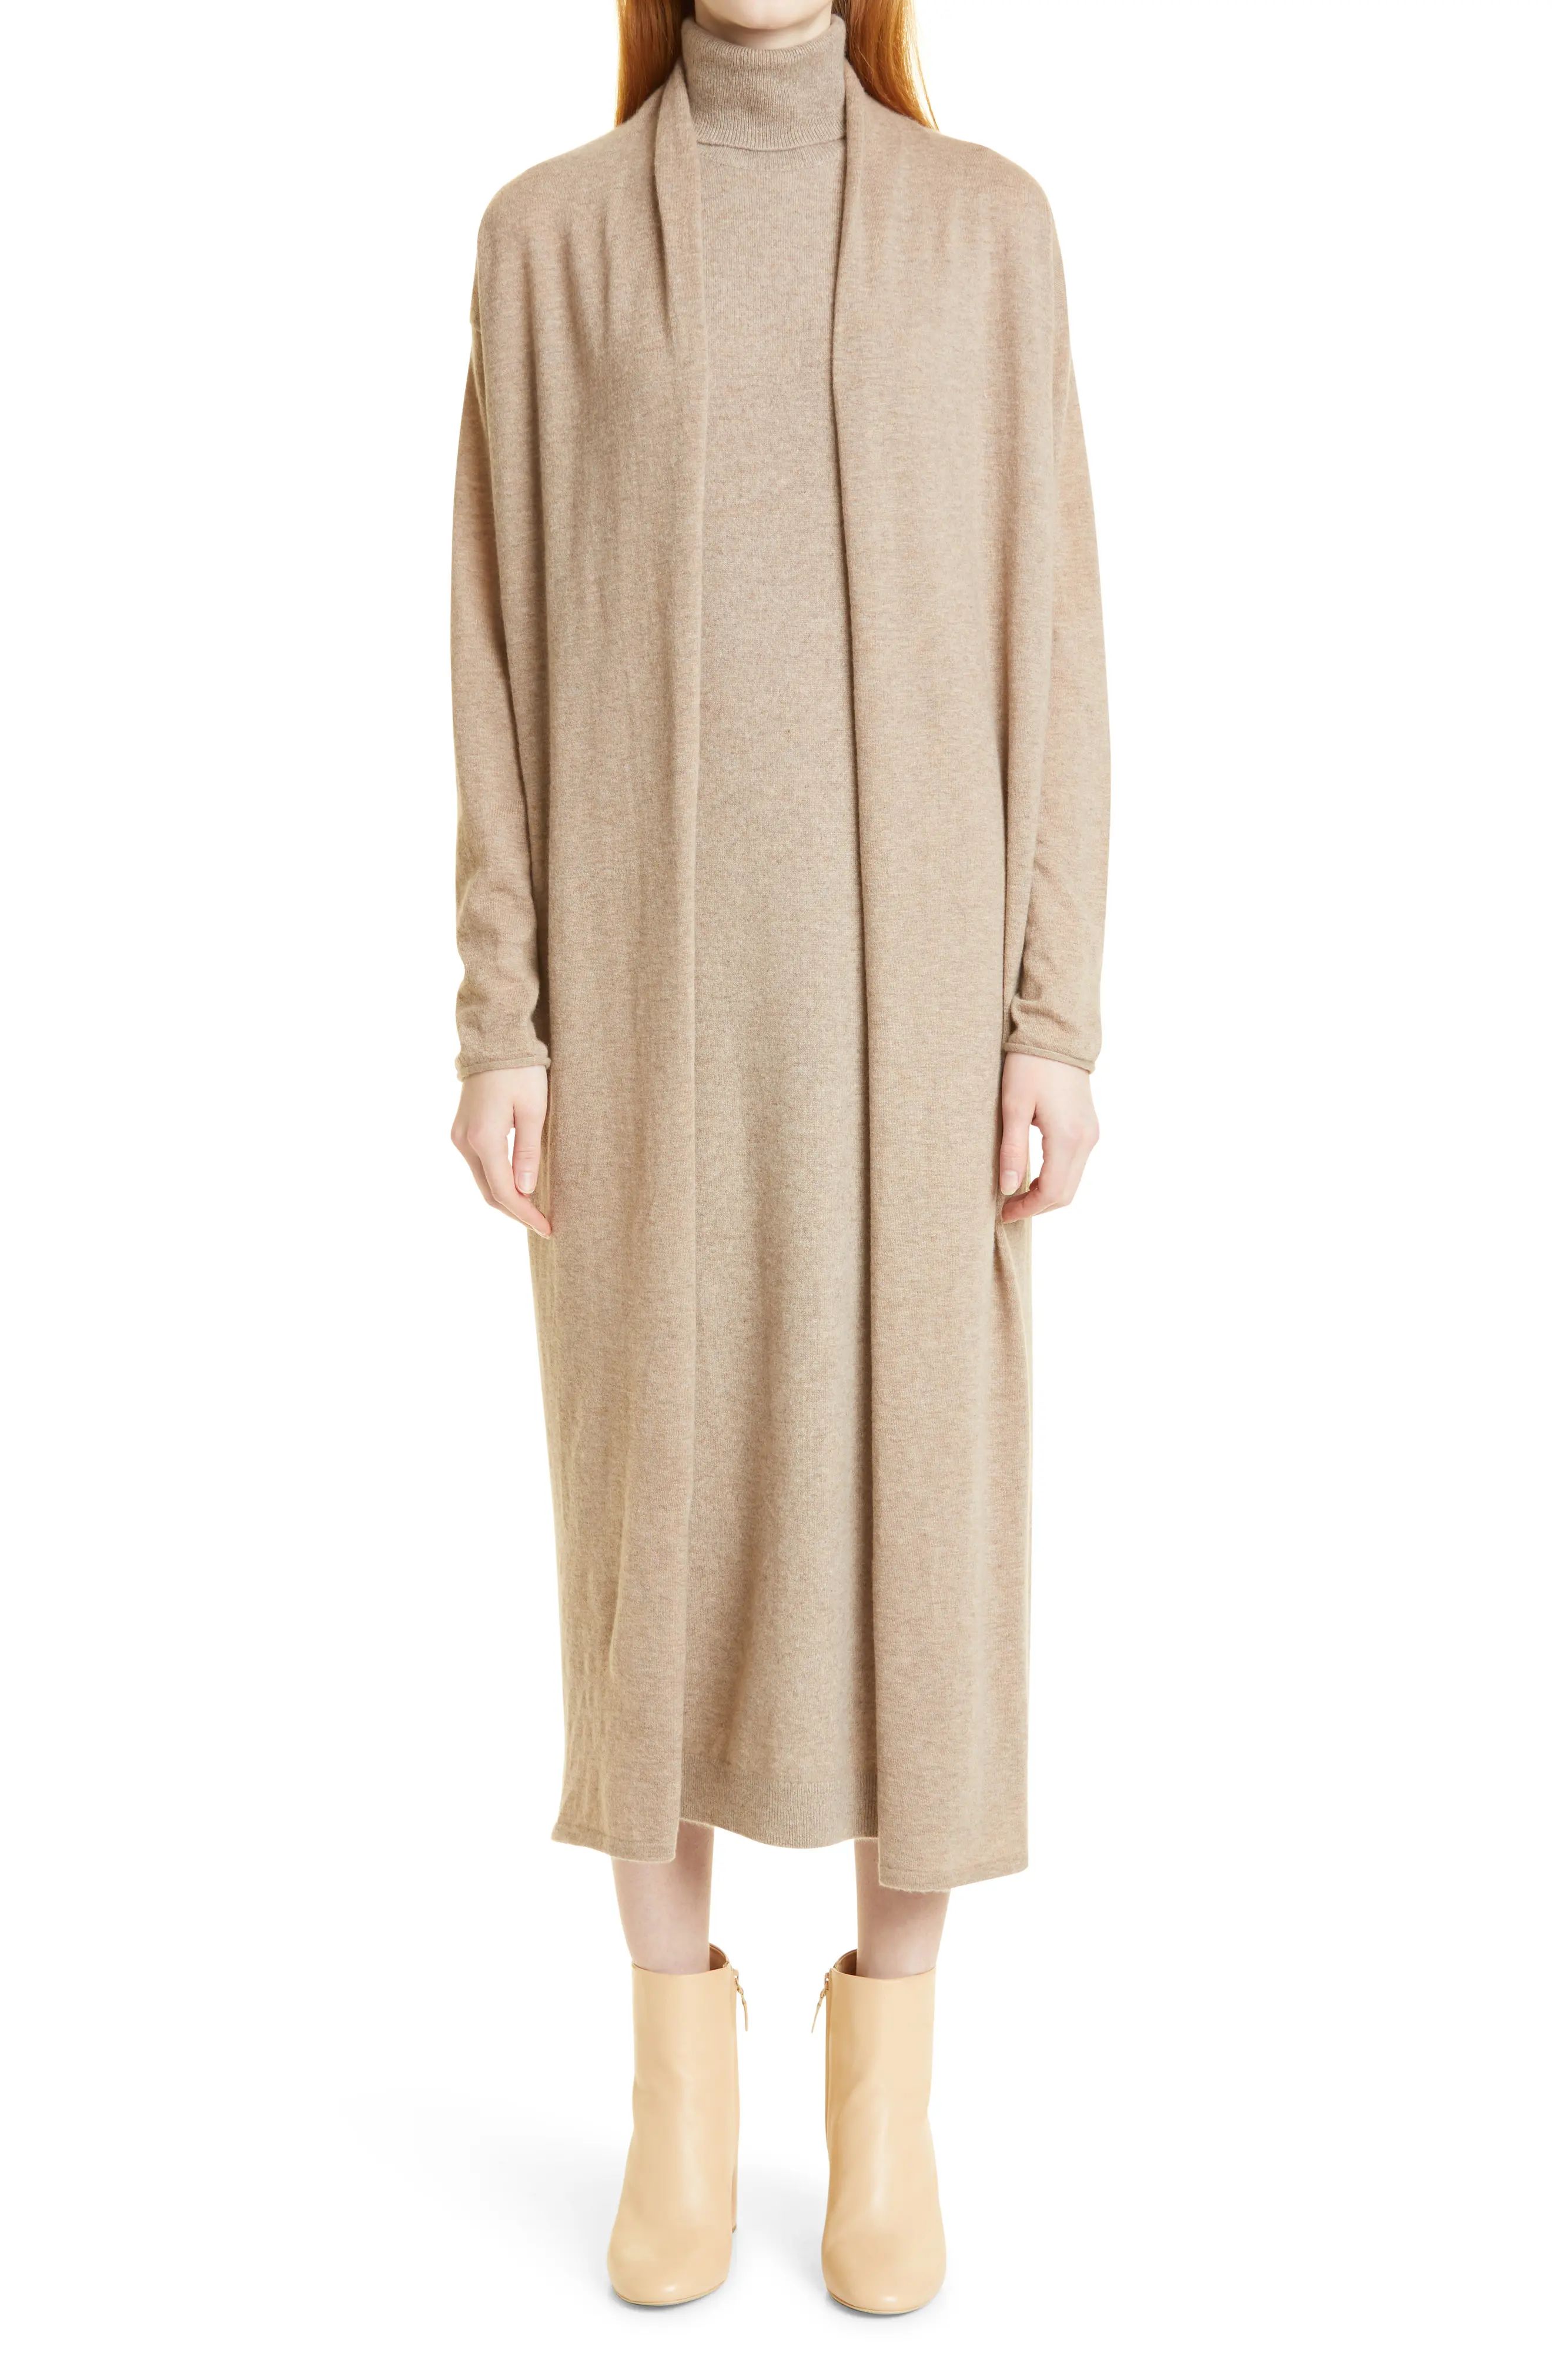 Nordstrom Signature Long Cashmere Cardigan, Size Large in Tan Portabella Heather at Nordstrom | Nordstrom